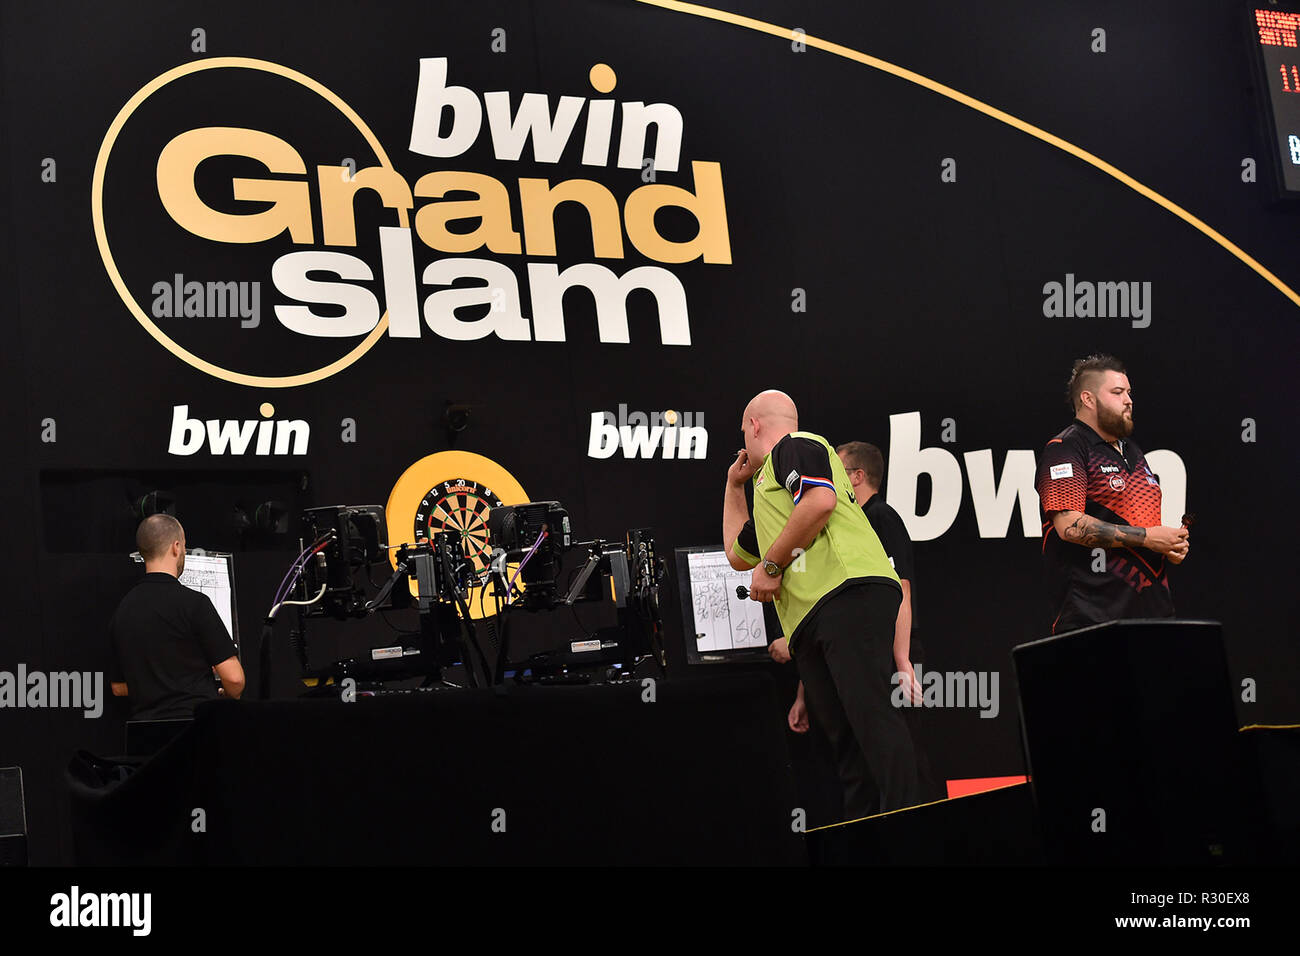 Wolverhampton, United Kingdom. 15th November 2018. Michael Van Gerwen in  action with Michael Smith in the background during the BWIN Grand Slam of  Darts Group stage at Aldersley Leisure Village, Wolverhampton (©